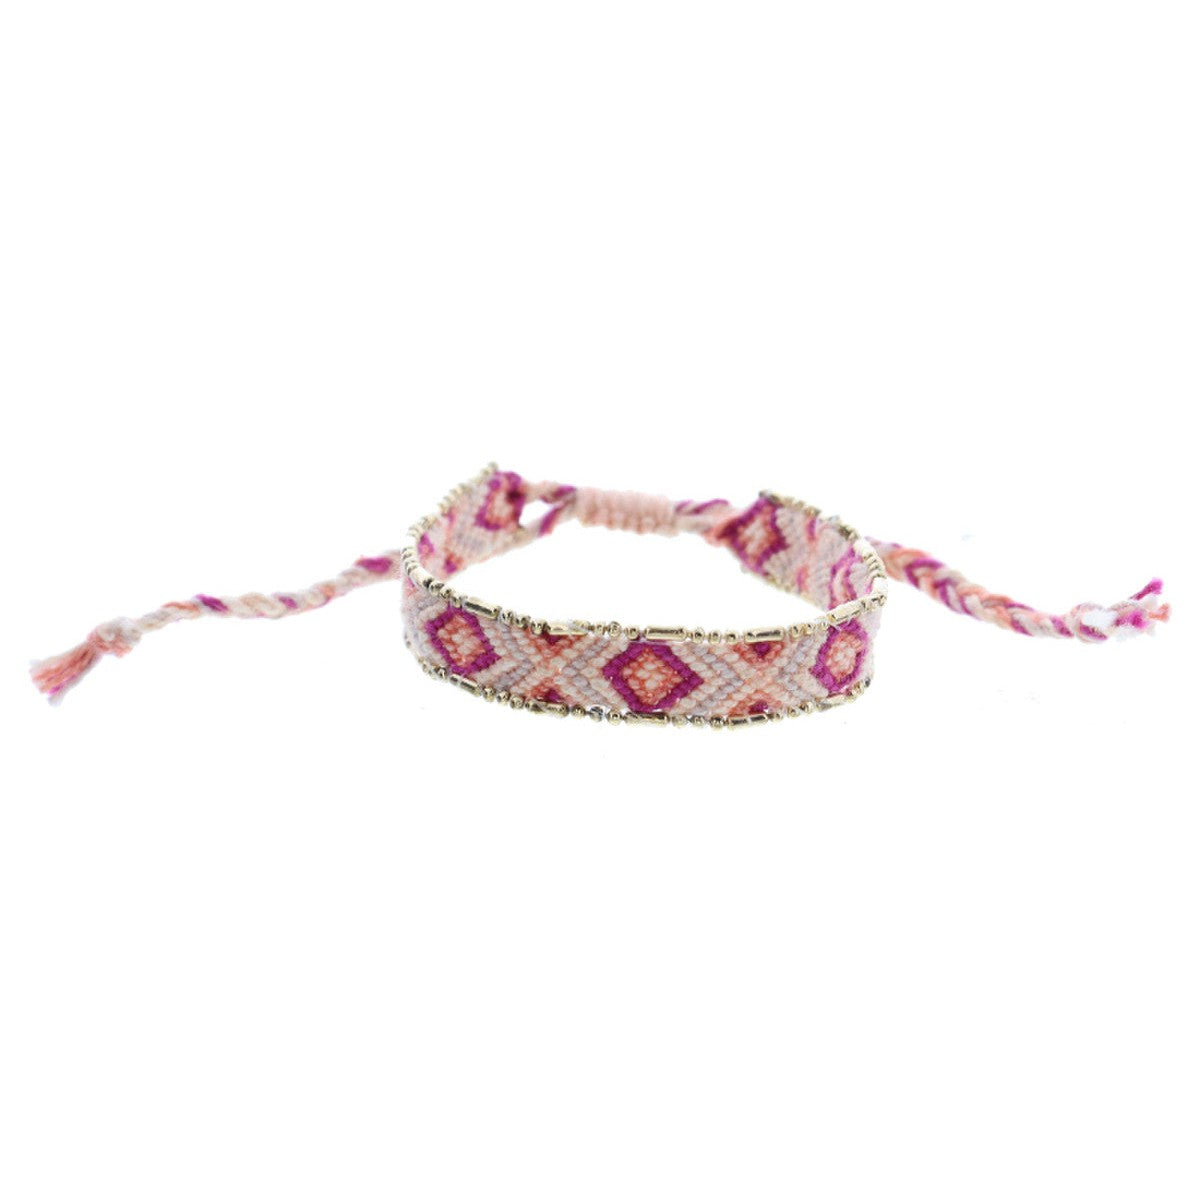 Jane Marie Kids Magenta, Coral, Peach, Dusty Lavender Woven Band With Gold Accent Edge Bracelet-JANE MARIE-Little Giant Kidz